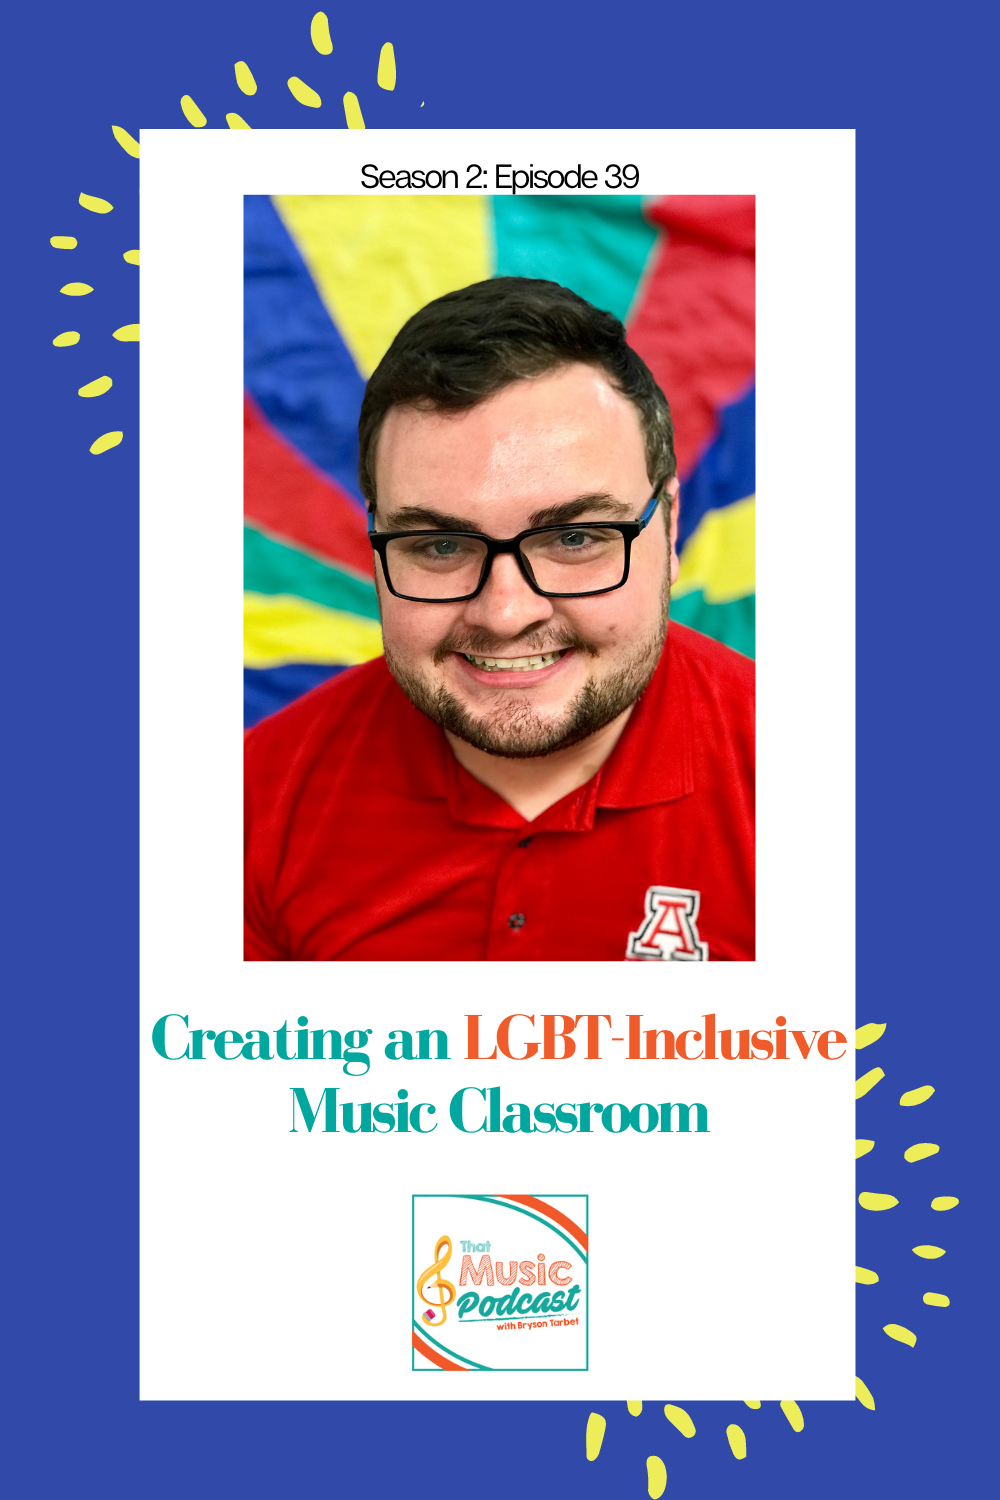 Creating an LGBT-Inclusive Music Classroom. Save this for later on Pinterest!